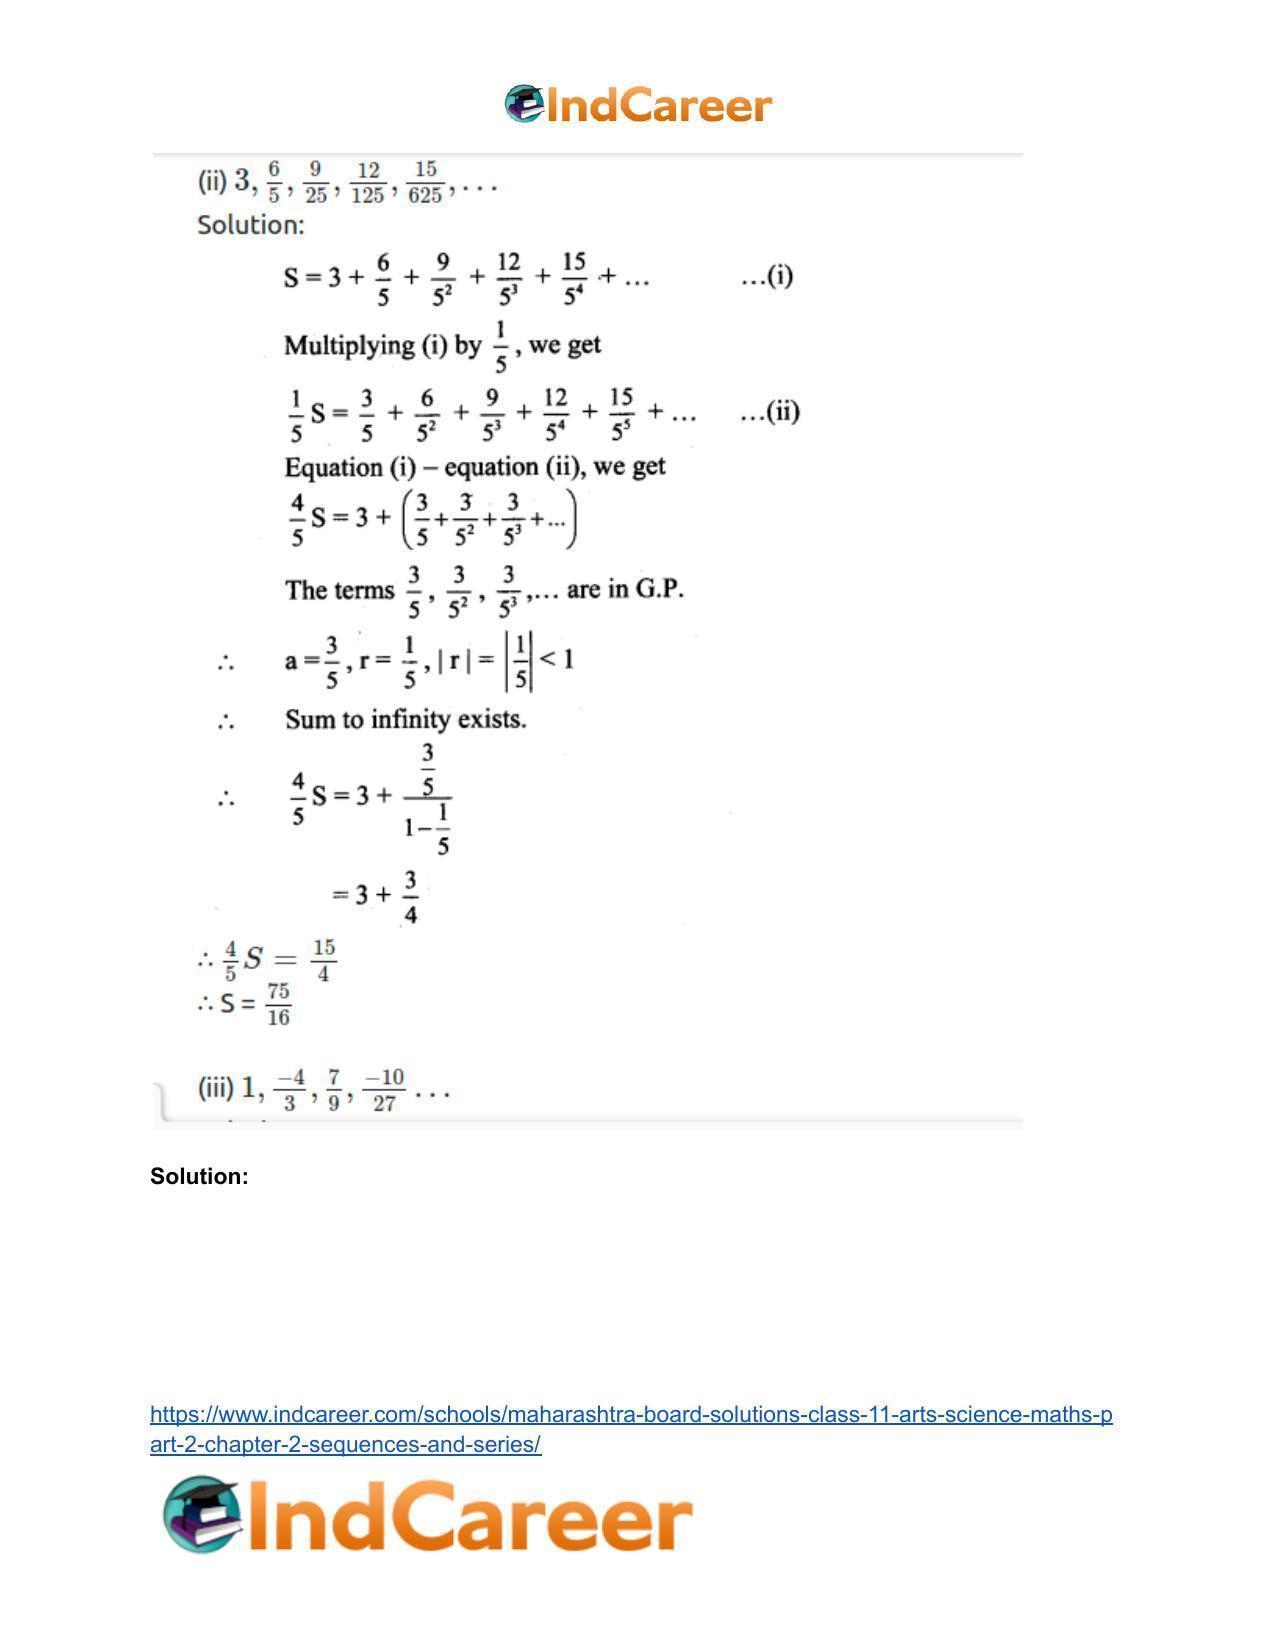 Maharashtra Board Solutions Class 11-Arts & Science Maths (Part 2): Chapter 2- Sequences and Series - Page 66